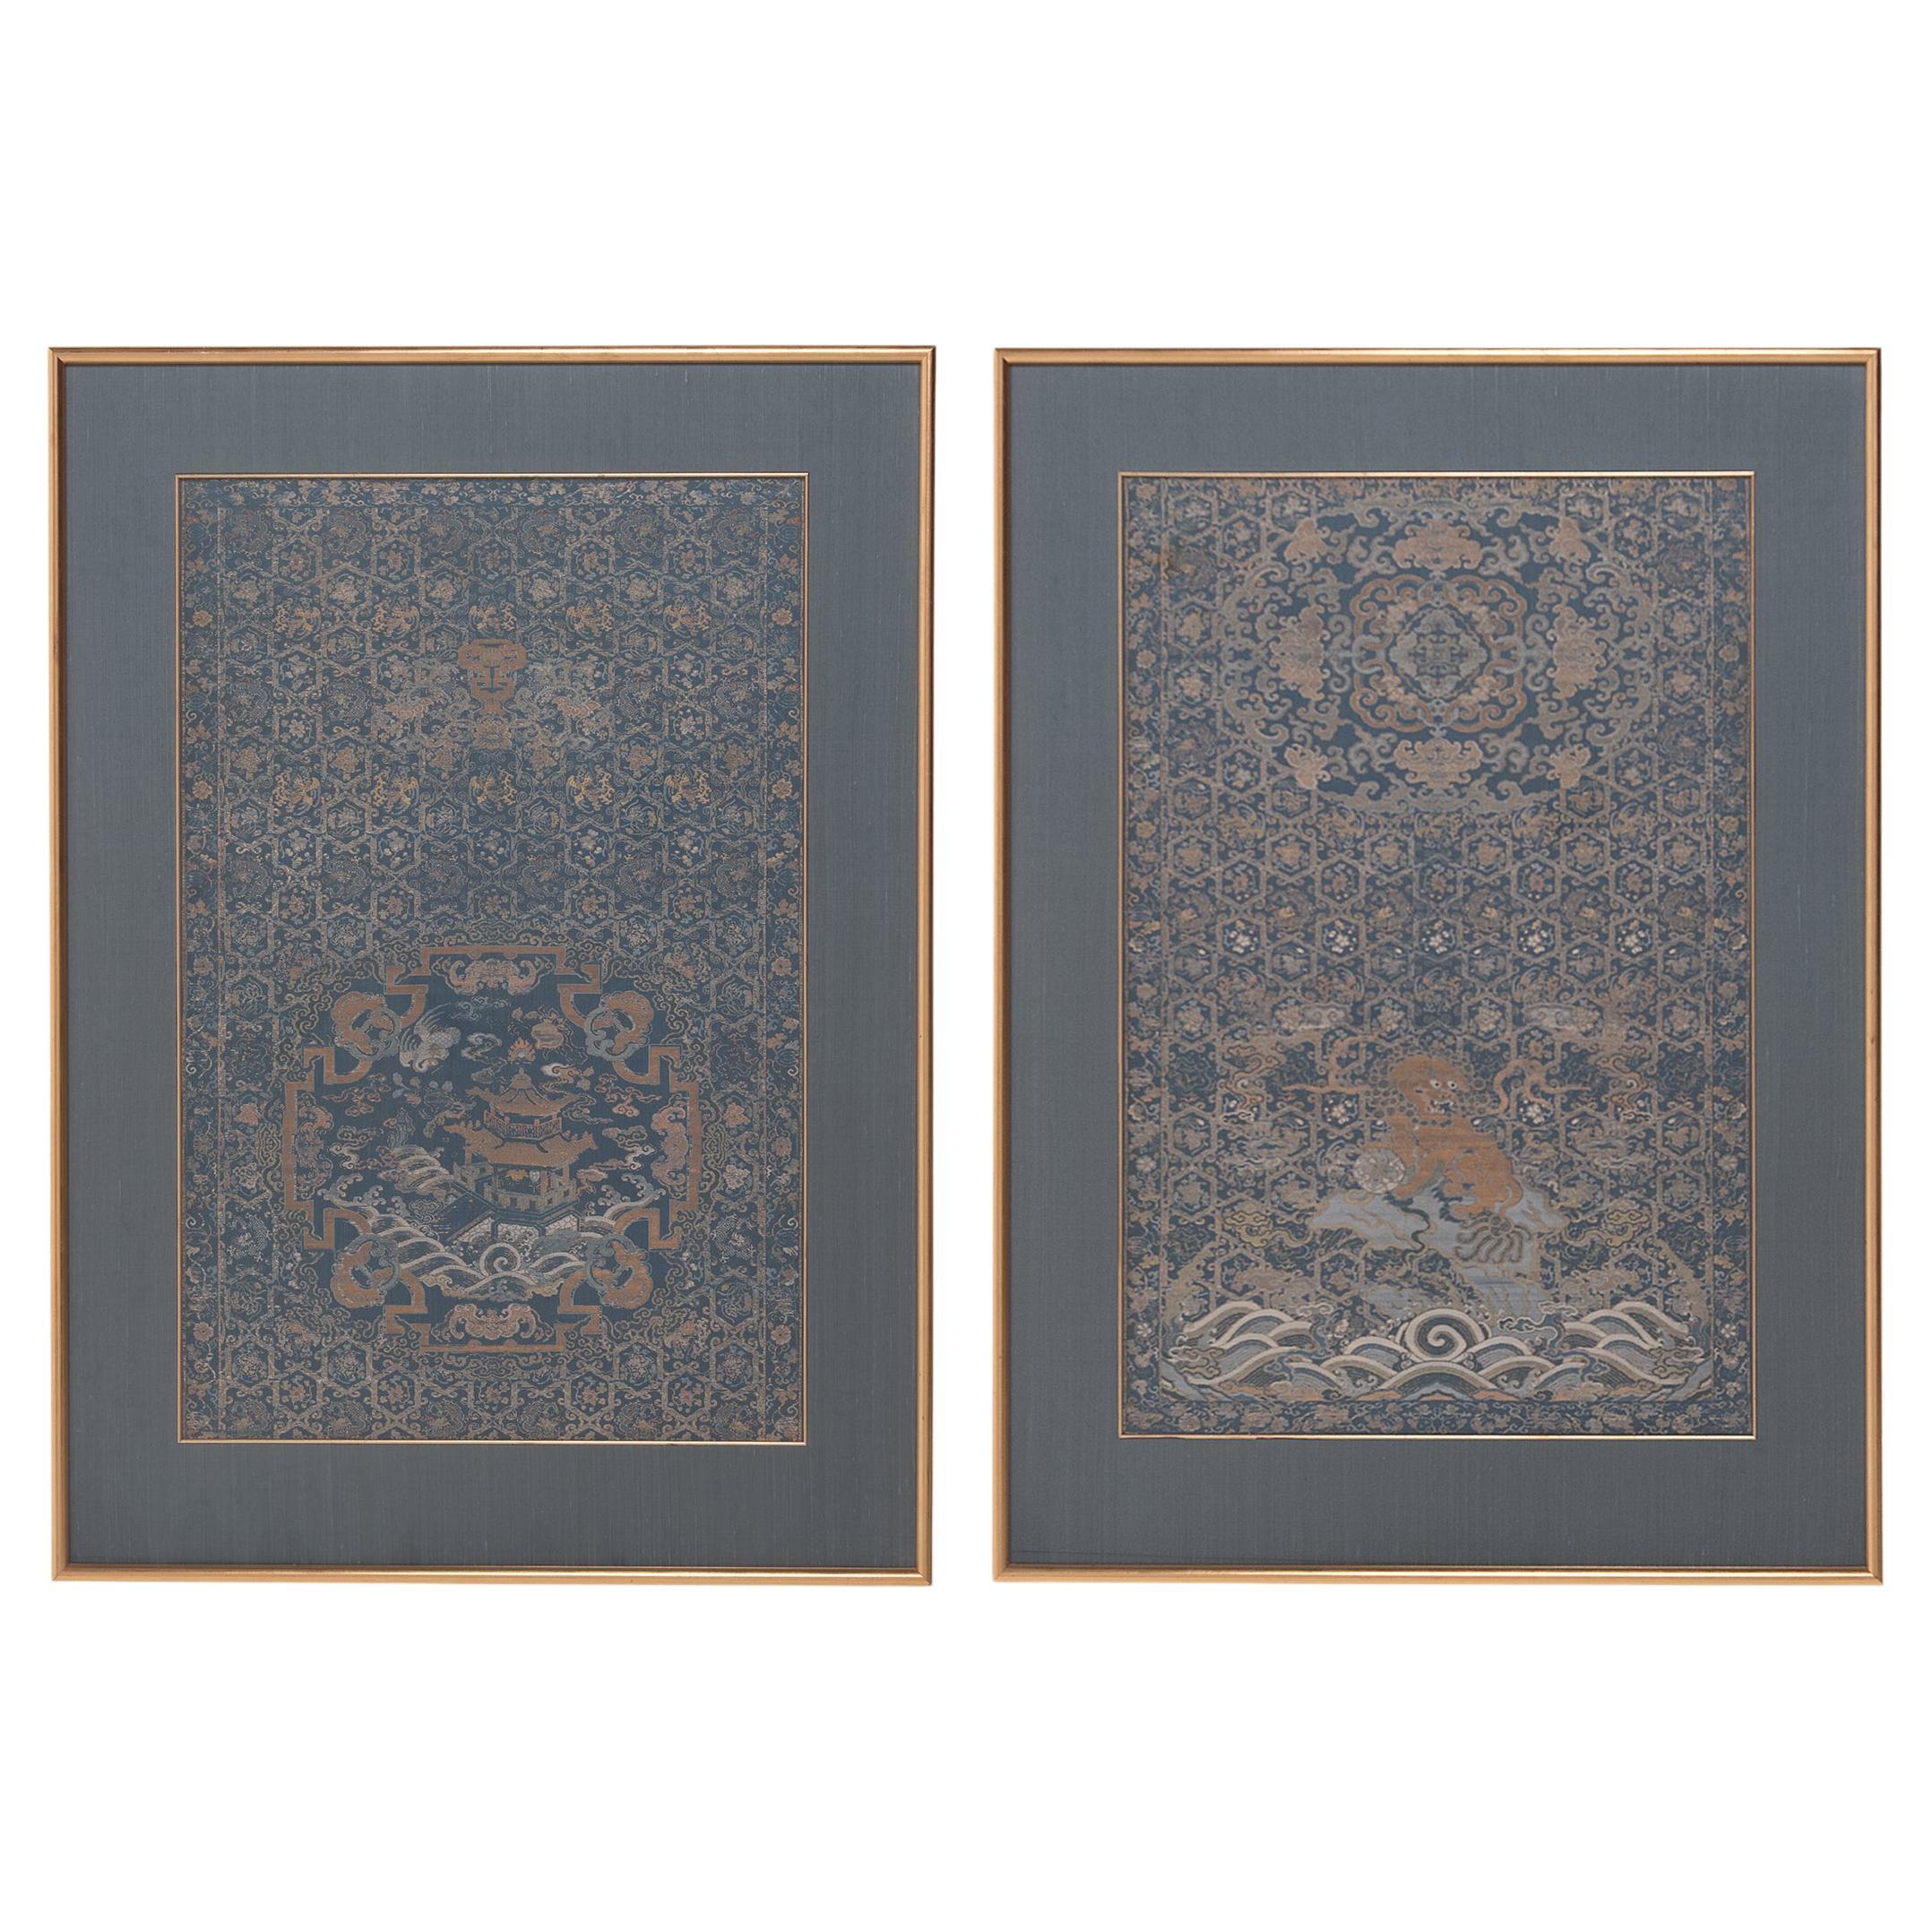 Pair of Framed Chinese Silk Brocade Chair Panels, c. 1850 For Sale